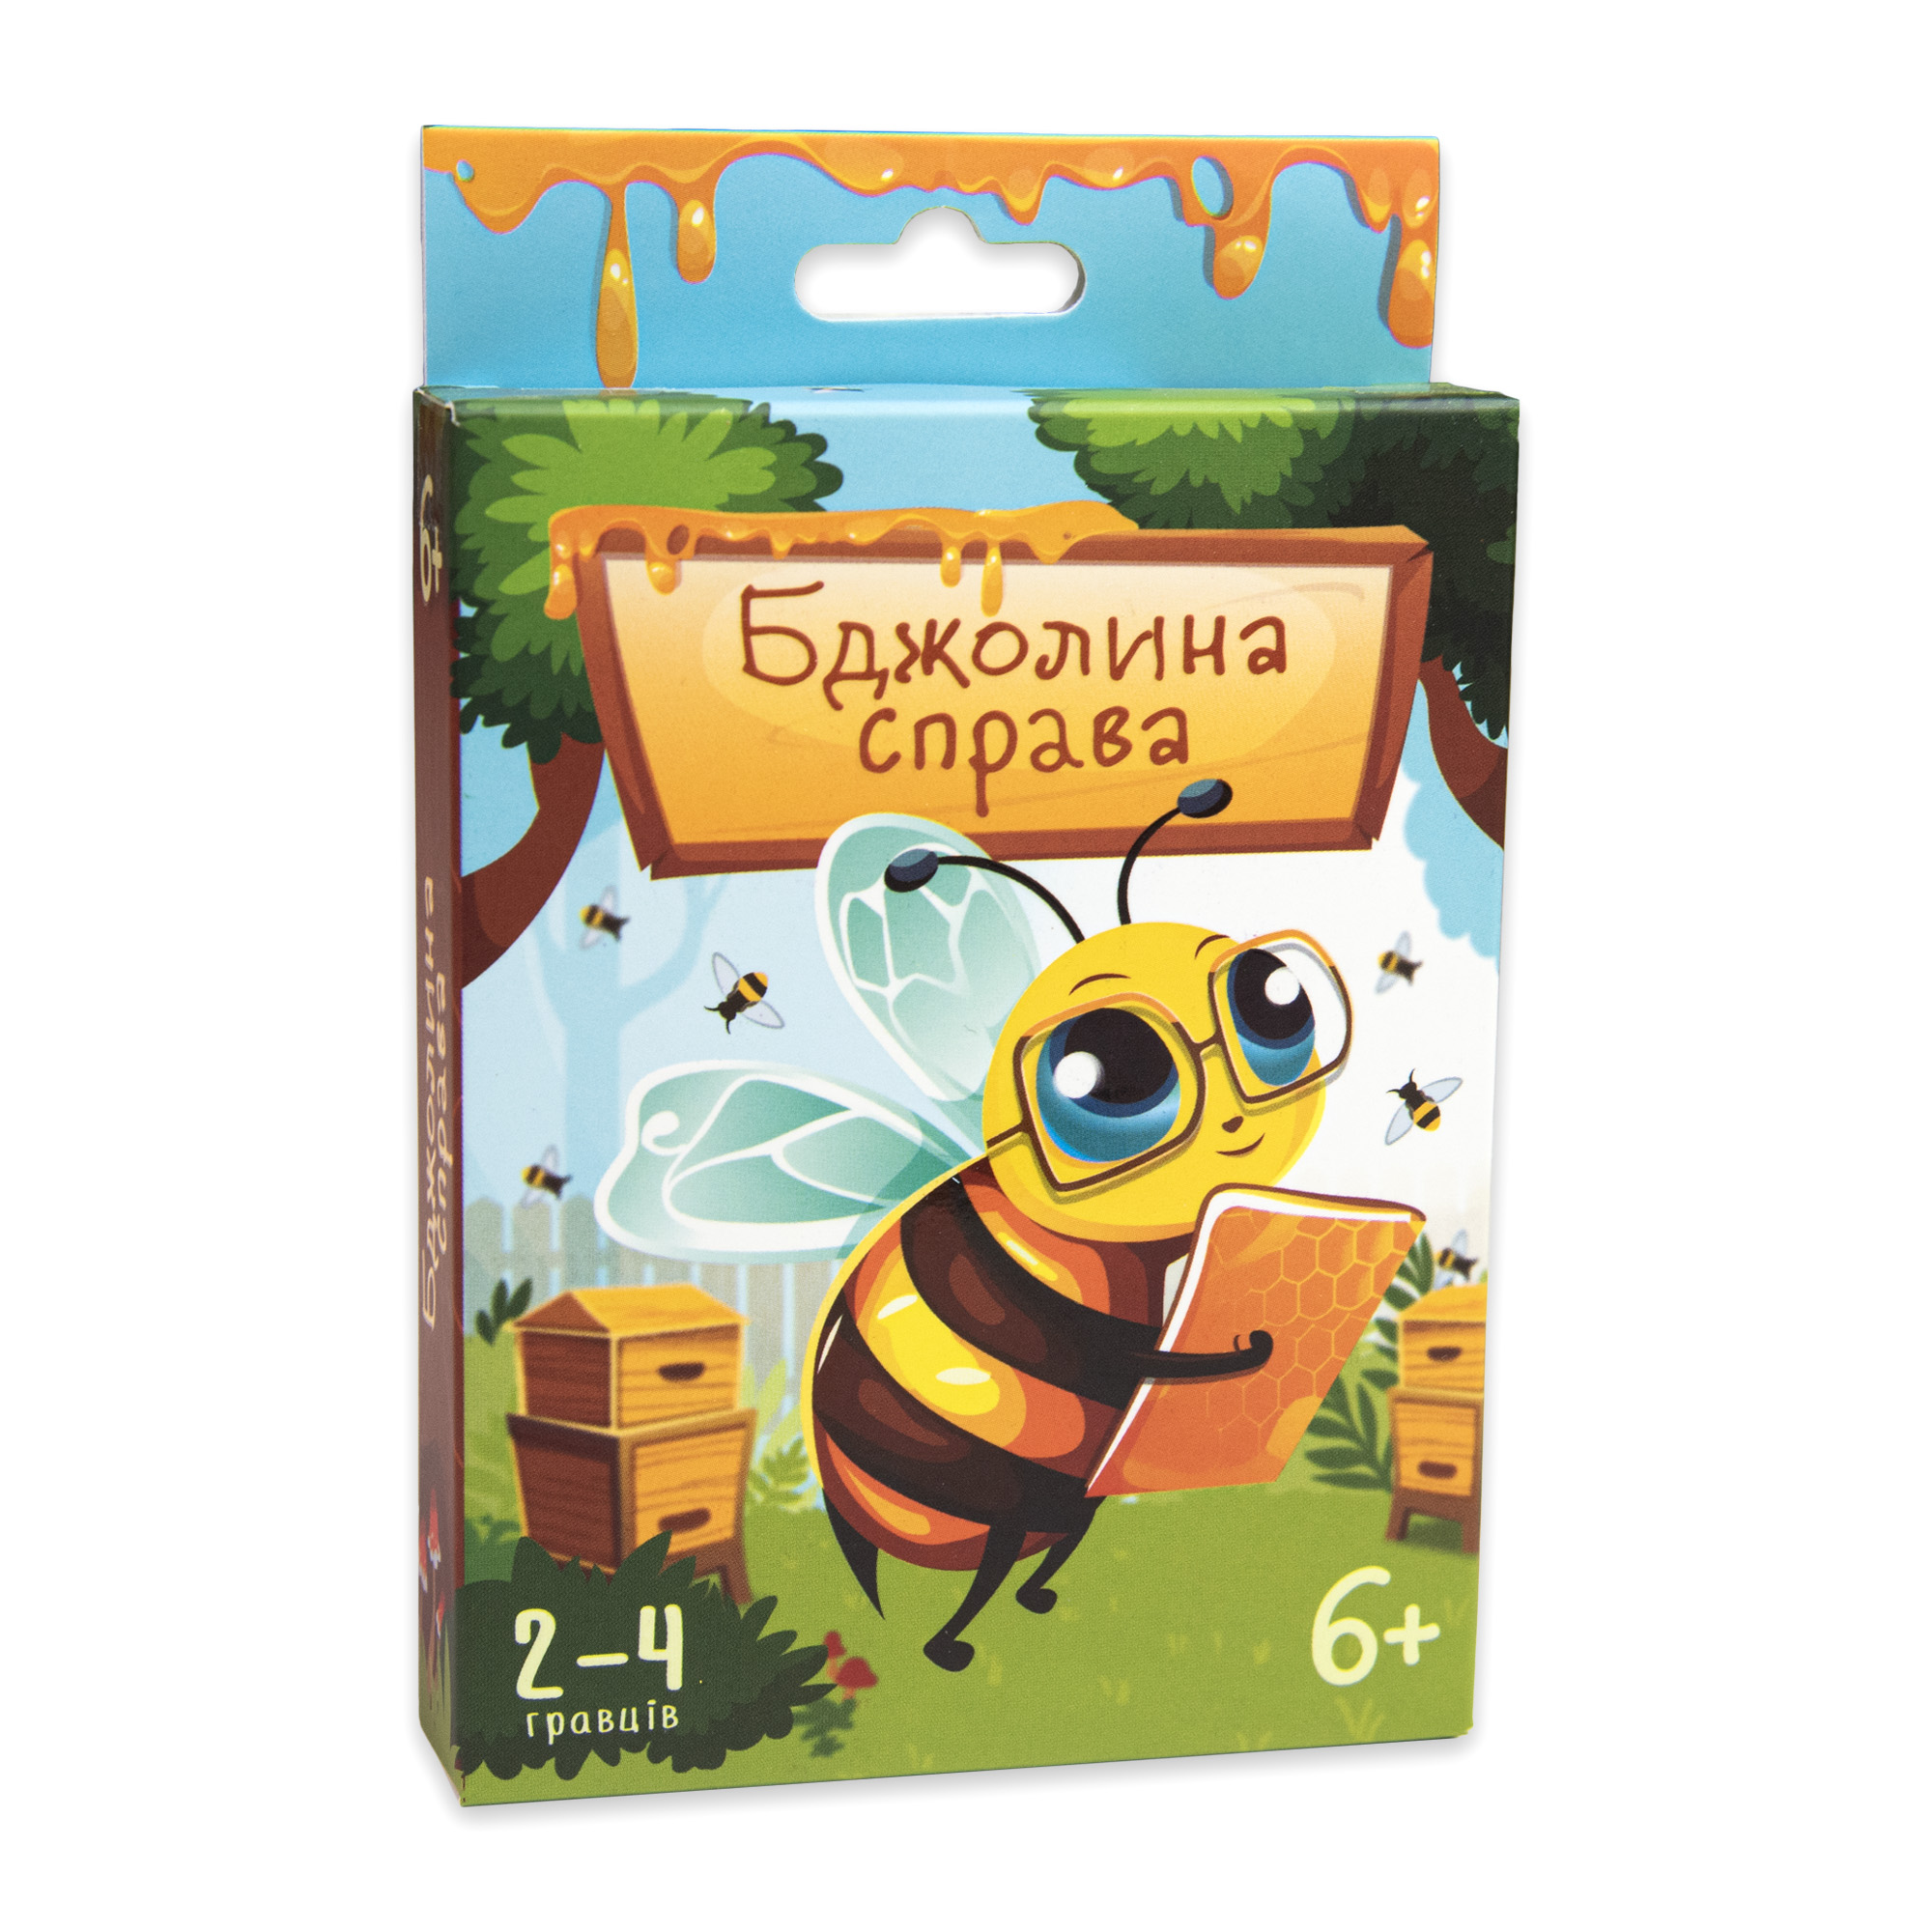 Board game Strateg "Bee on the right" in Ukrainian (30785)